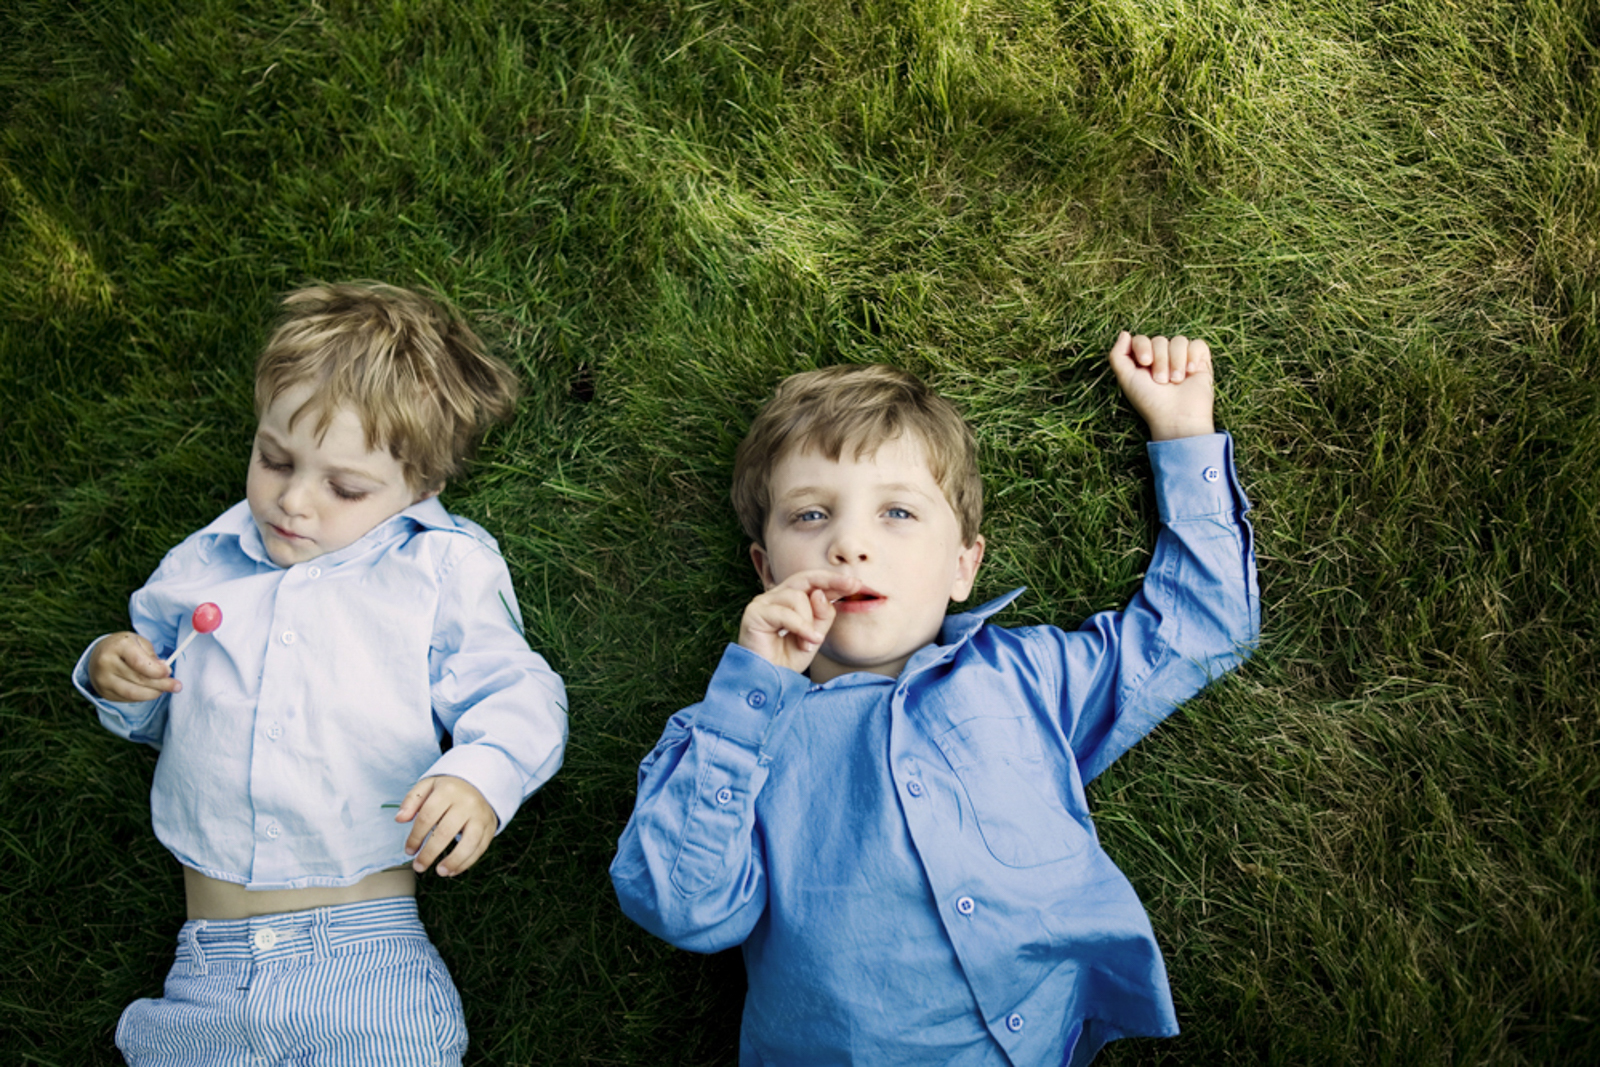 two young boys with lollipops on grass